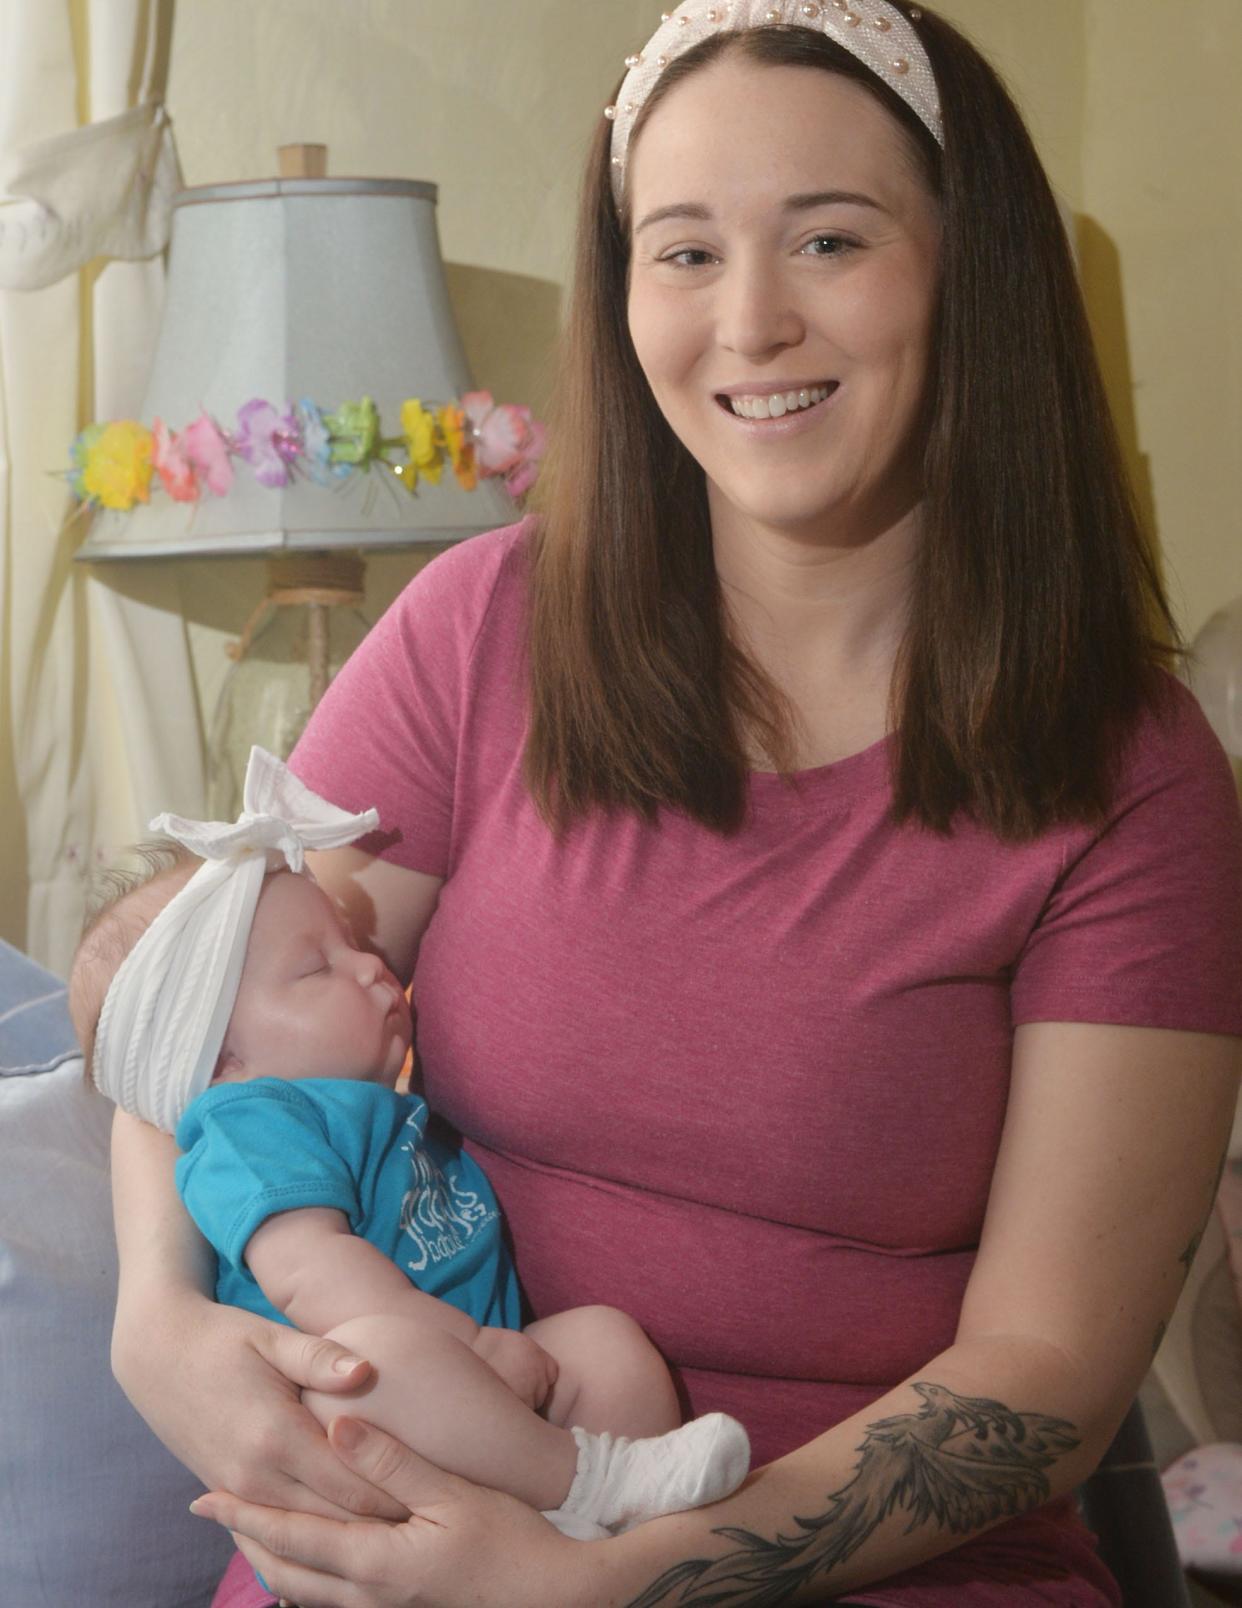 Maria Hodapp, 33, and her infant daughter, Lorelai Edwards, nearly died Feb. 29 when they both suffered unexpected complications during delivery at UPMC's Magee-Women's Hospital. Hodapp credits the team of doctors and nurses with saving both of their lives.